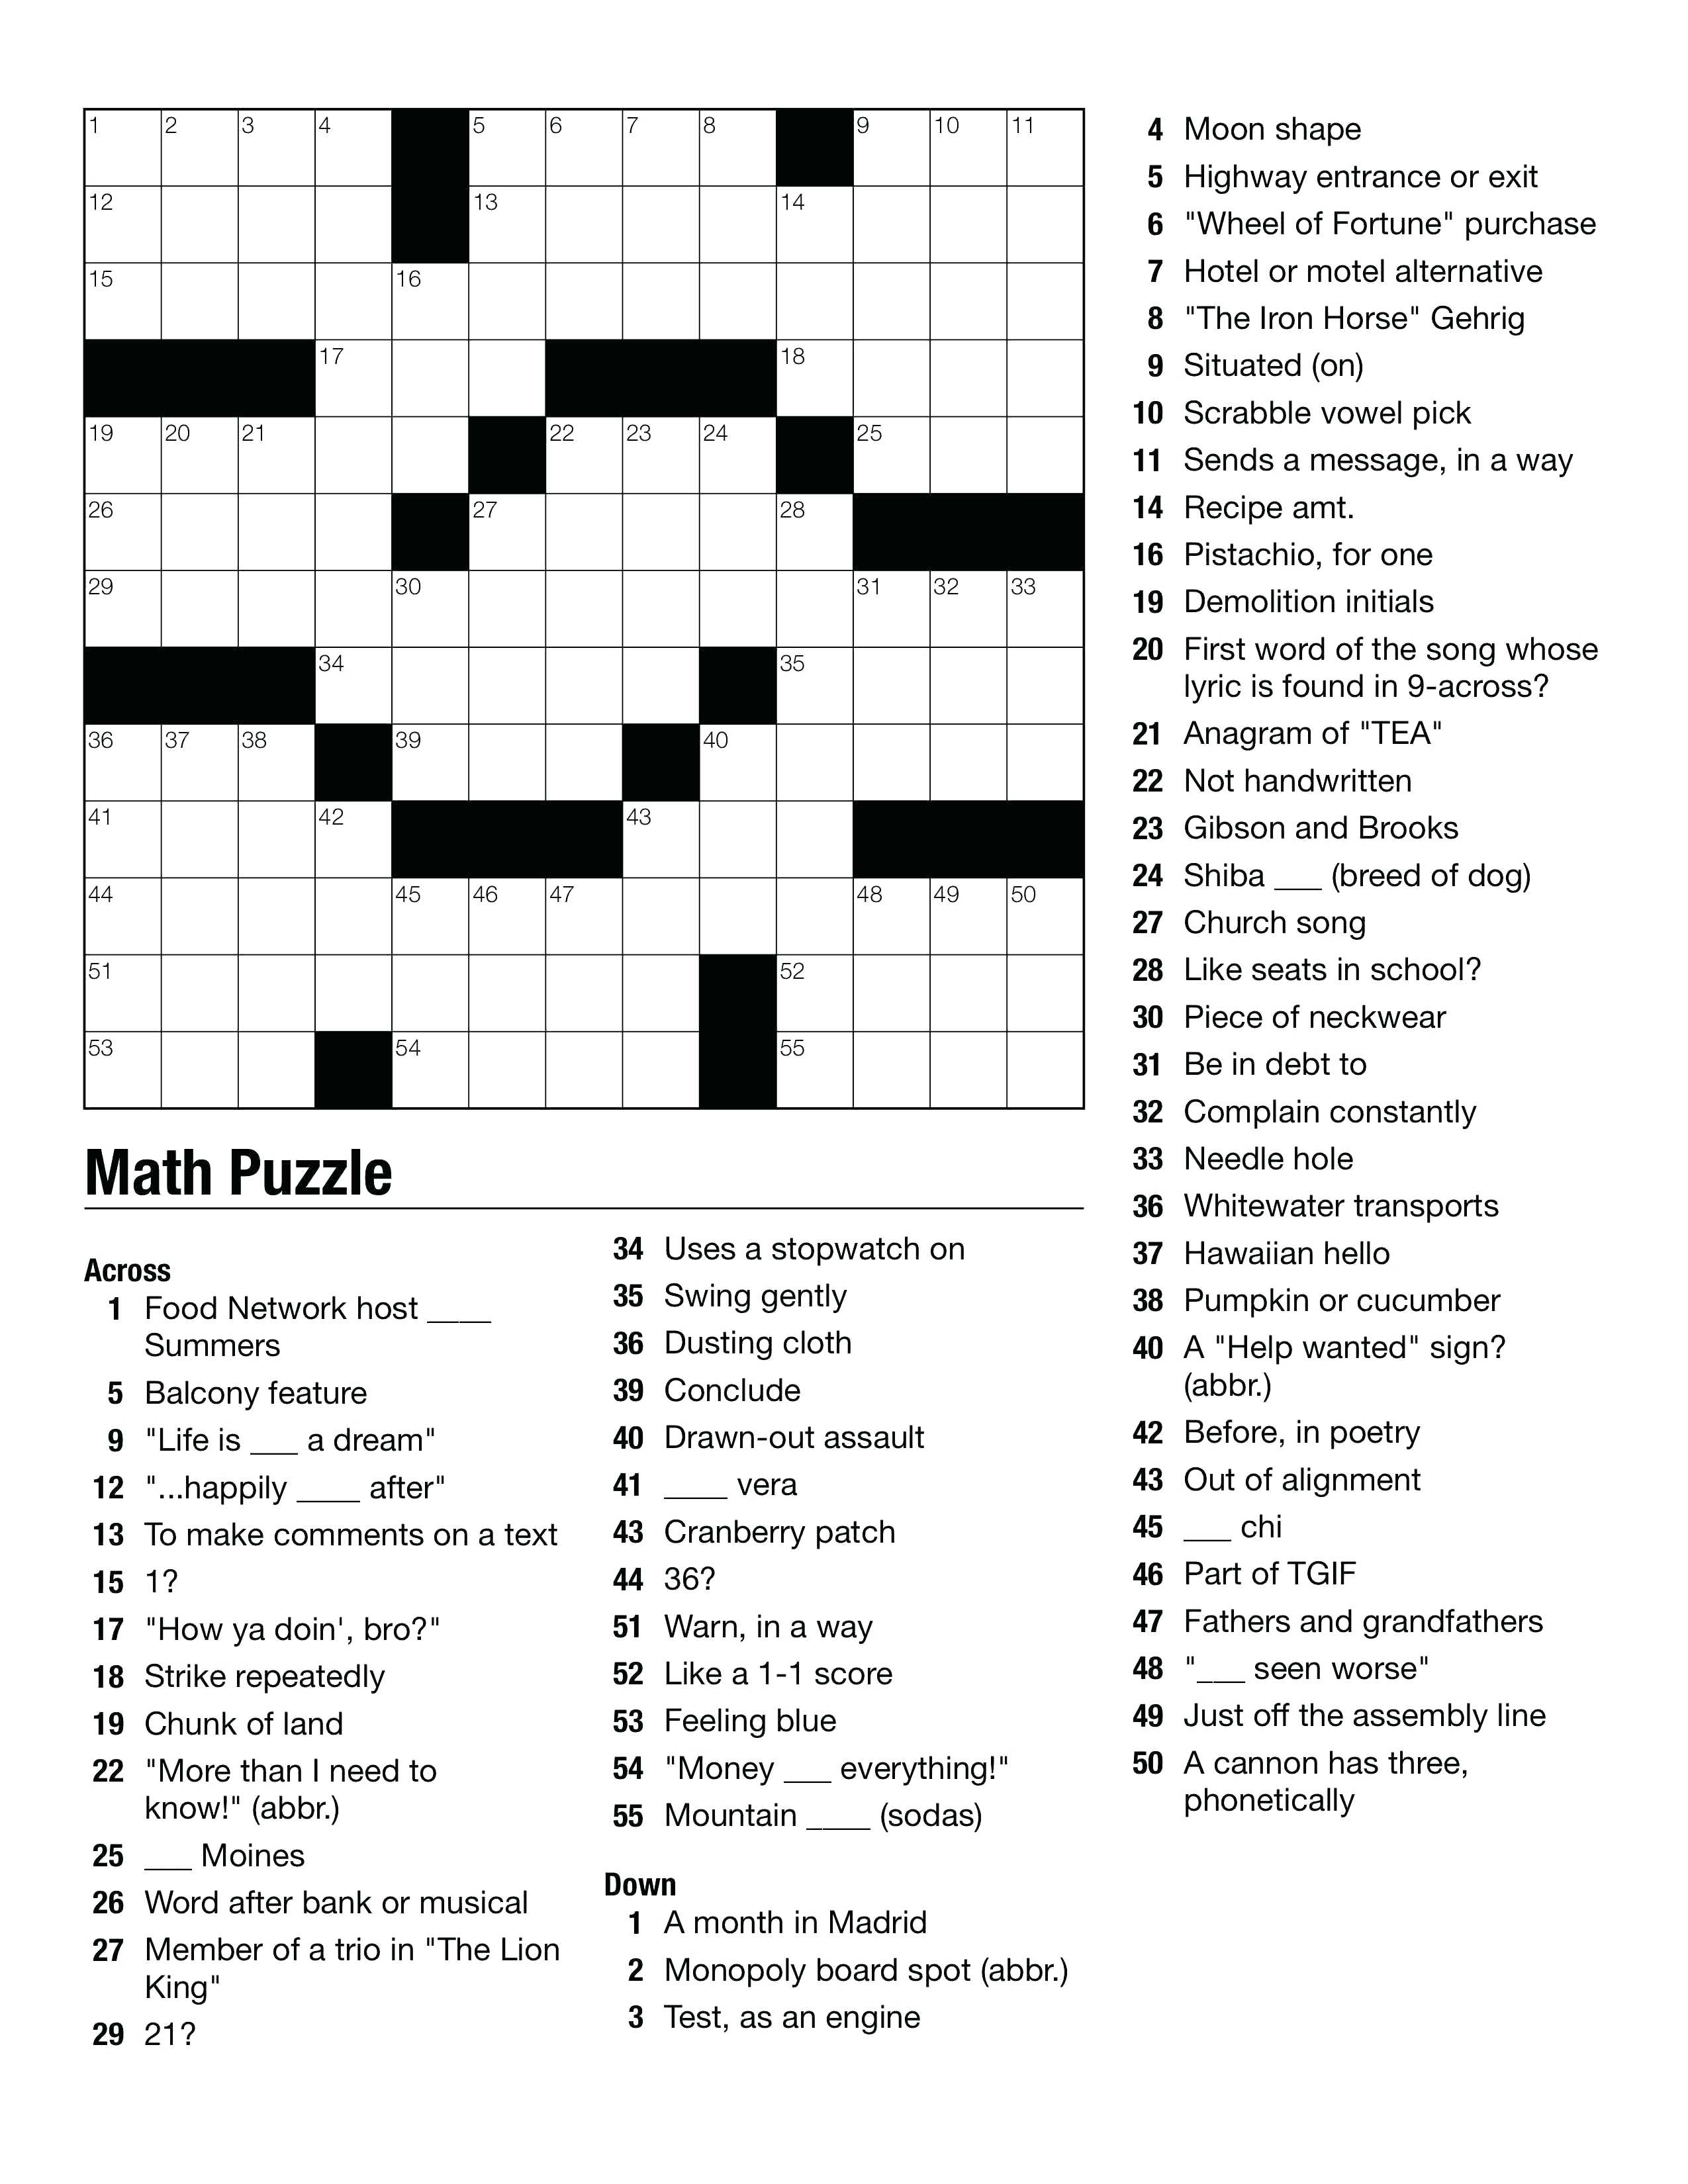 Geometry Puzzles Math Geometry Images Teaching Ideas On Crossword - Printable Math Crossword Puzzles